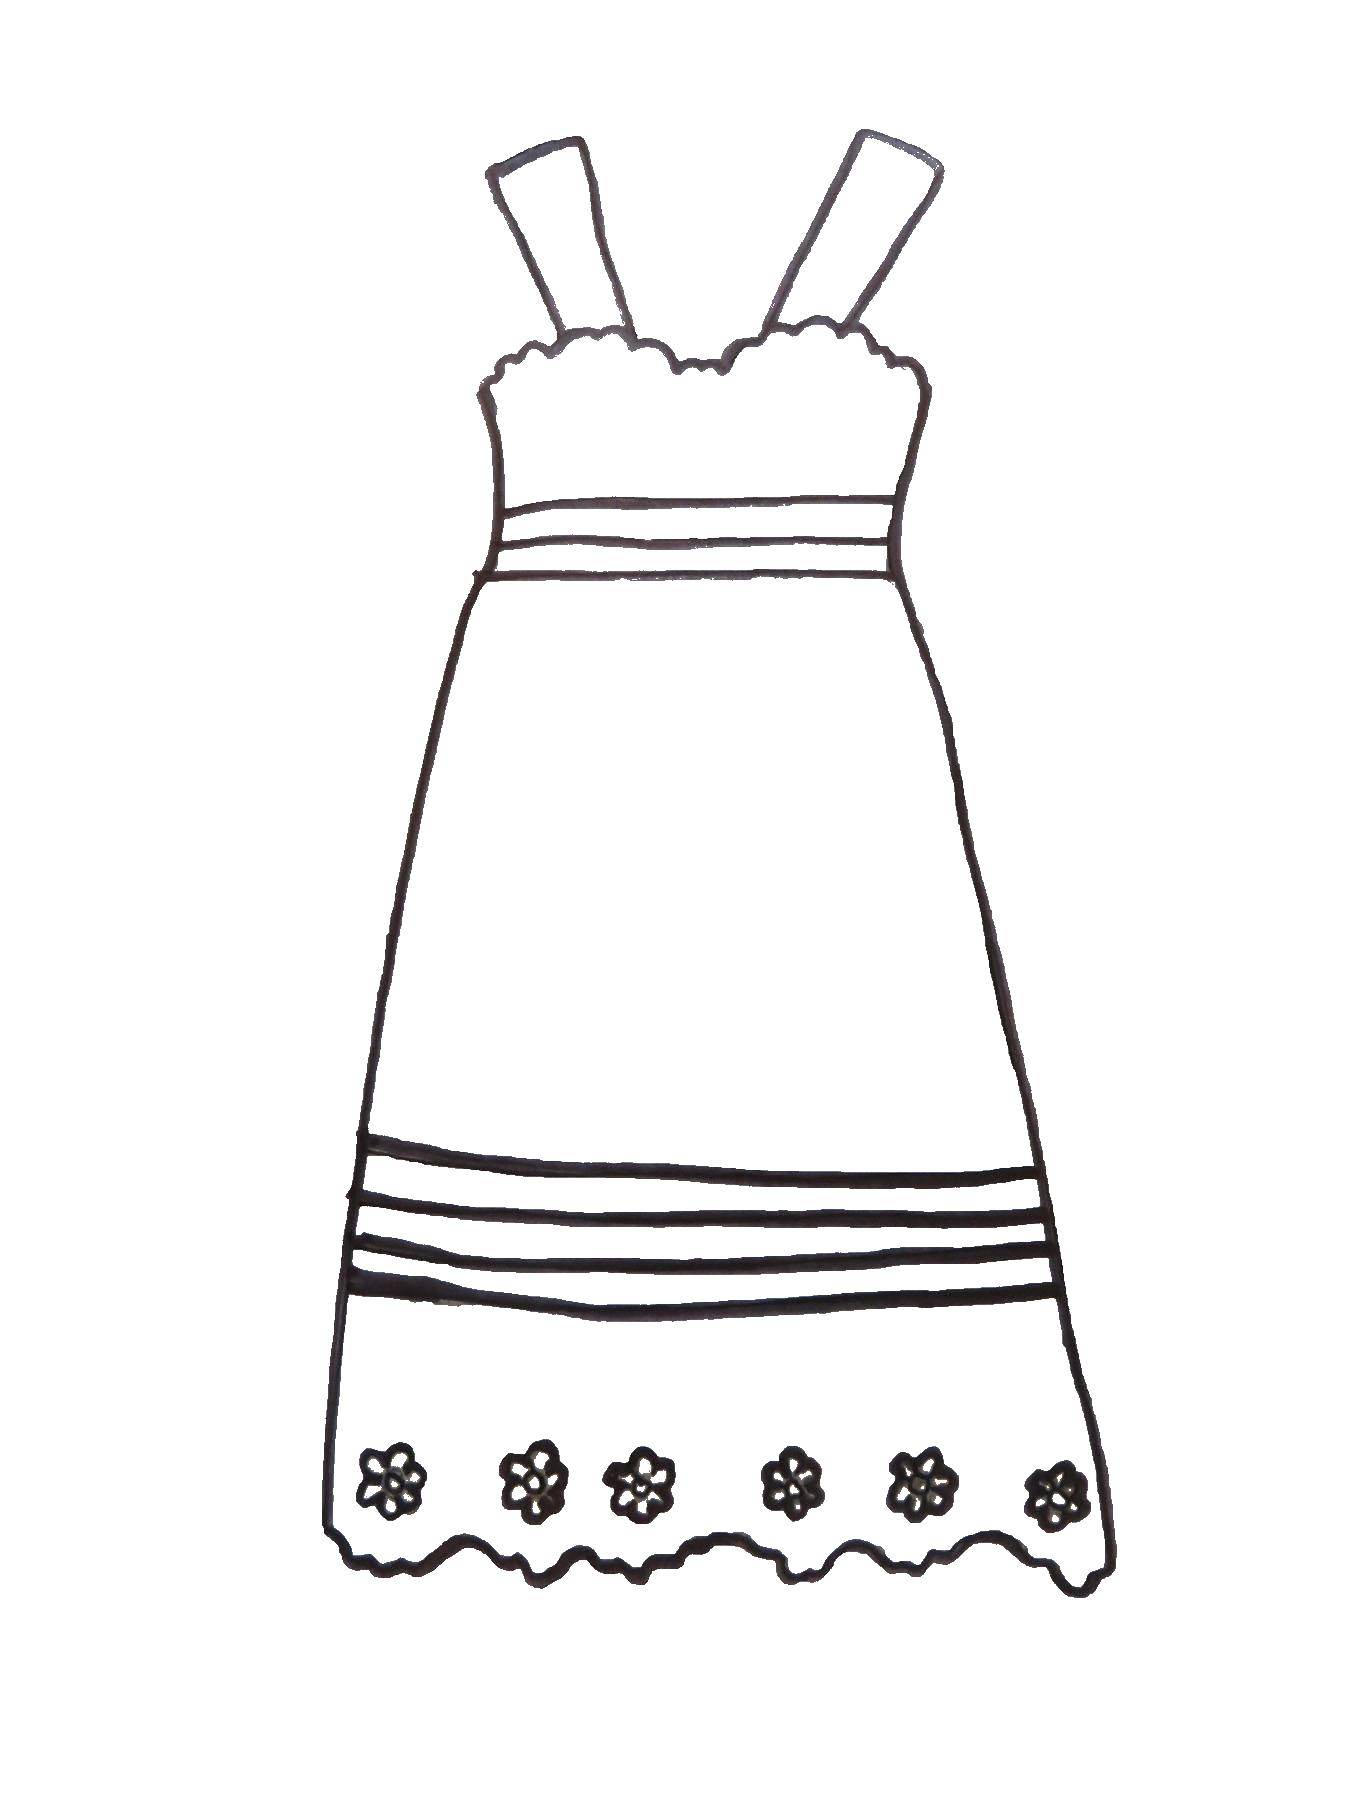 Coloring Summer dress. Category Dress. Tags:  Clothing, dress.